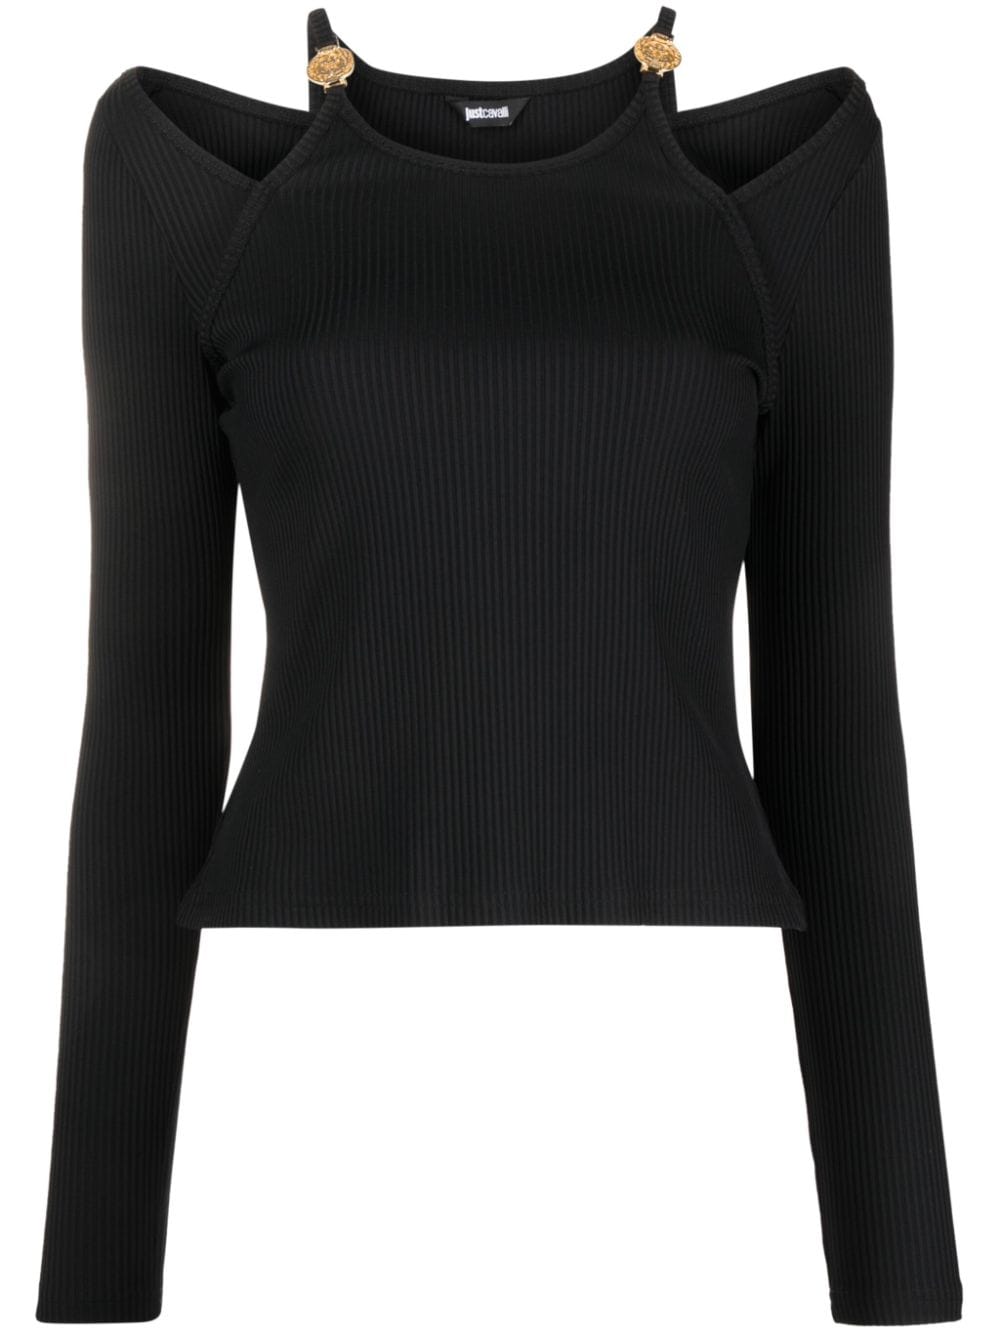 Just Cavalli cut-out detail ribbed top - Black